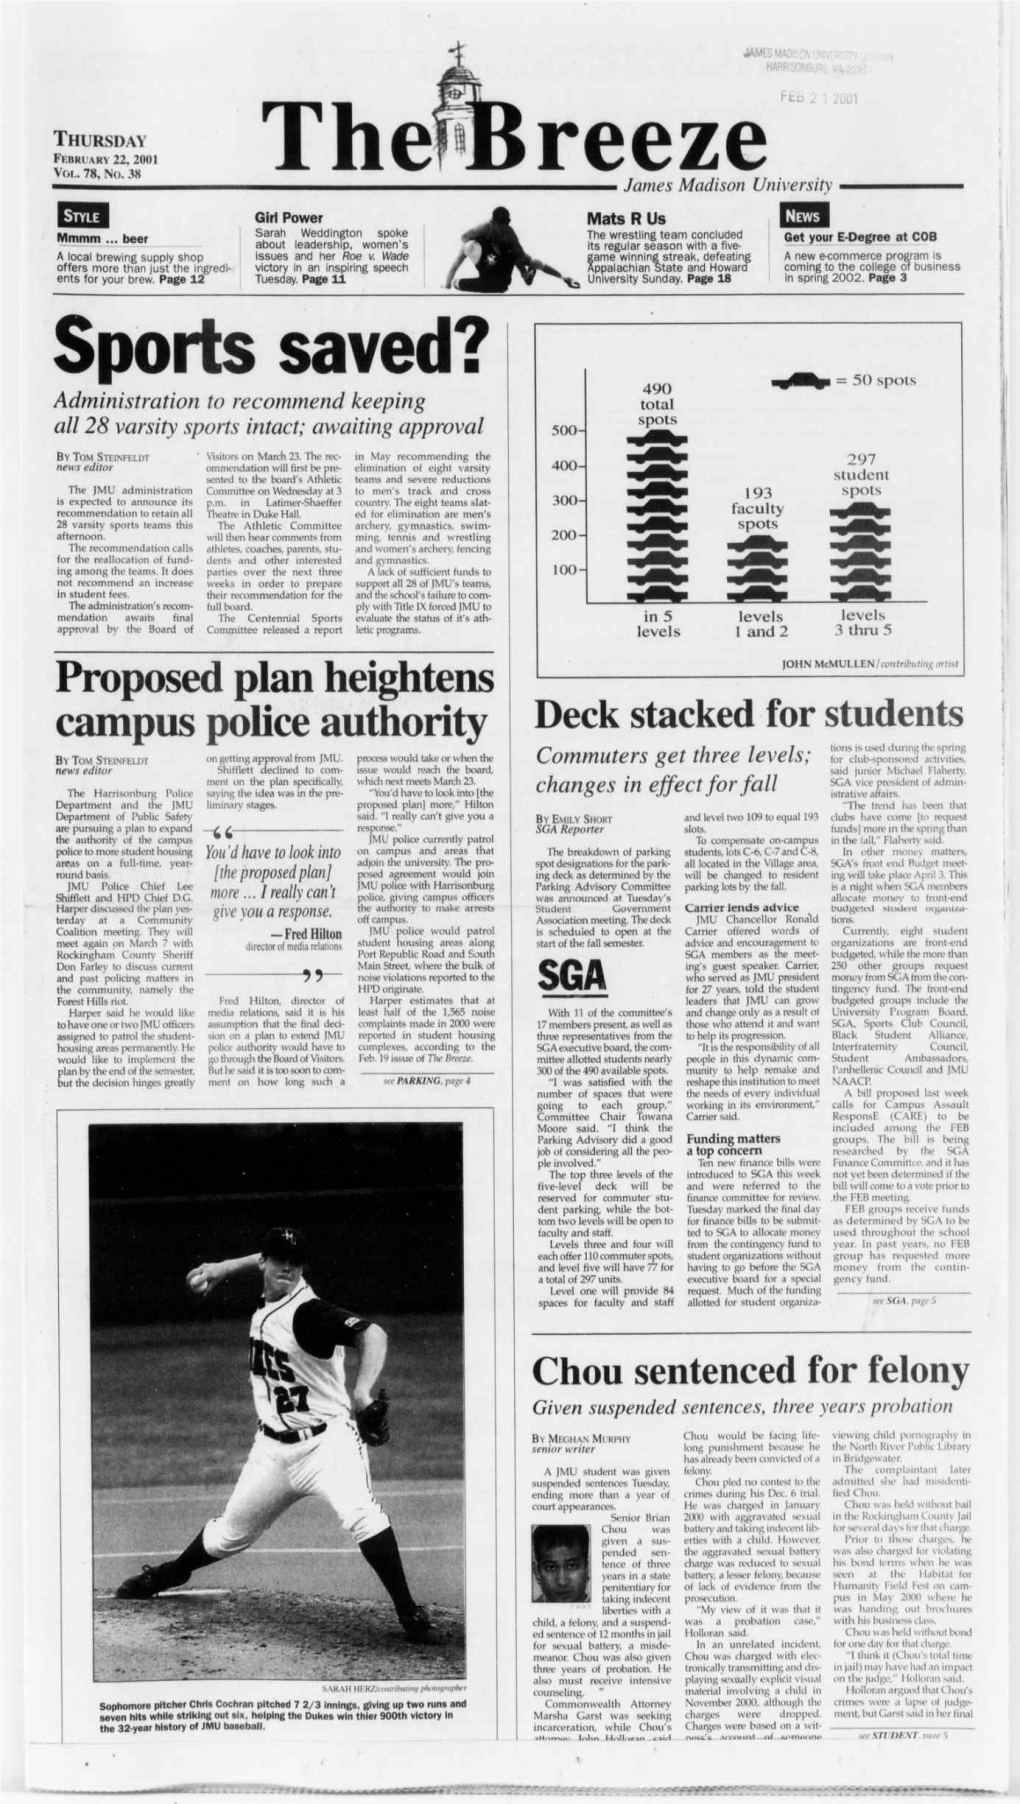 February 22, 2001 DUKE DAYS EVENTS CALENDAR TABLE of CONTENTS